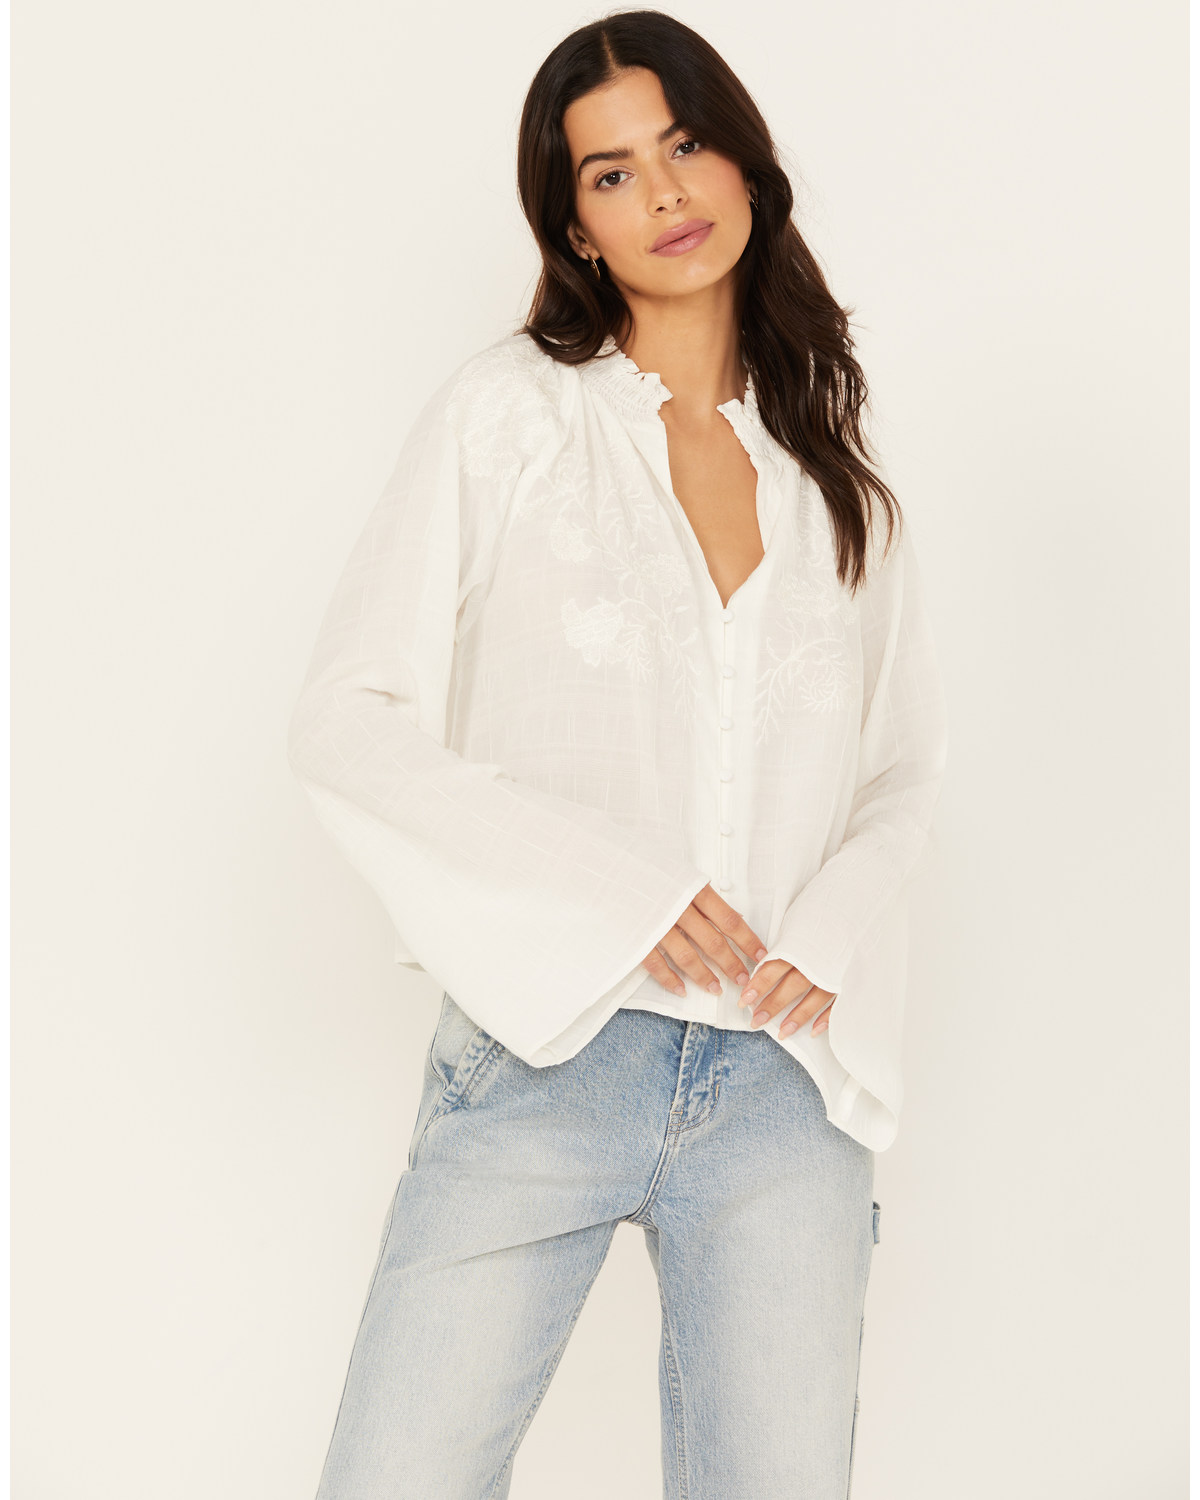 Cleo + Wolf Women's Cropped Button-Down Blouse